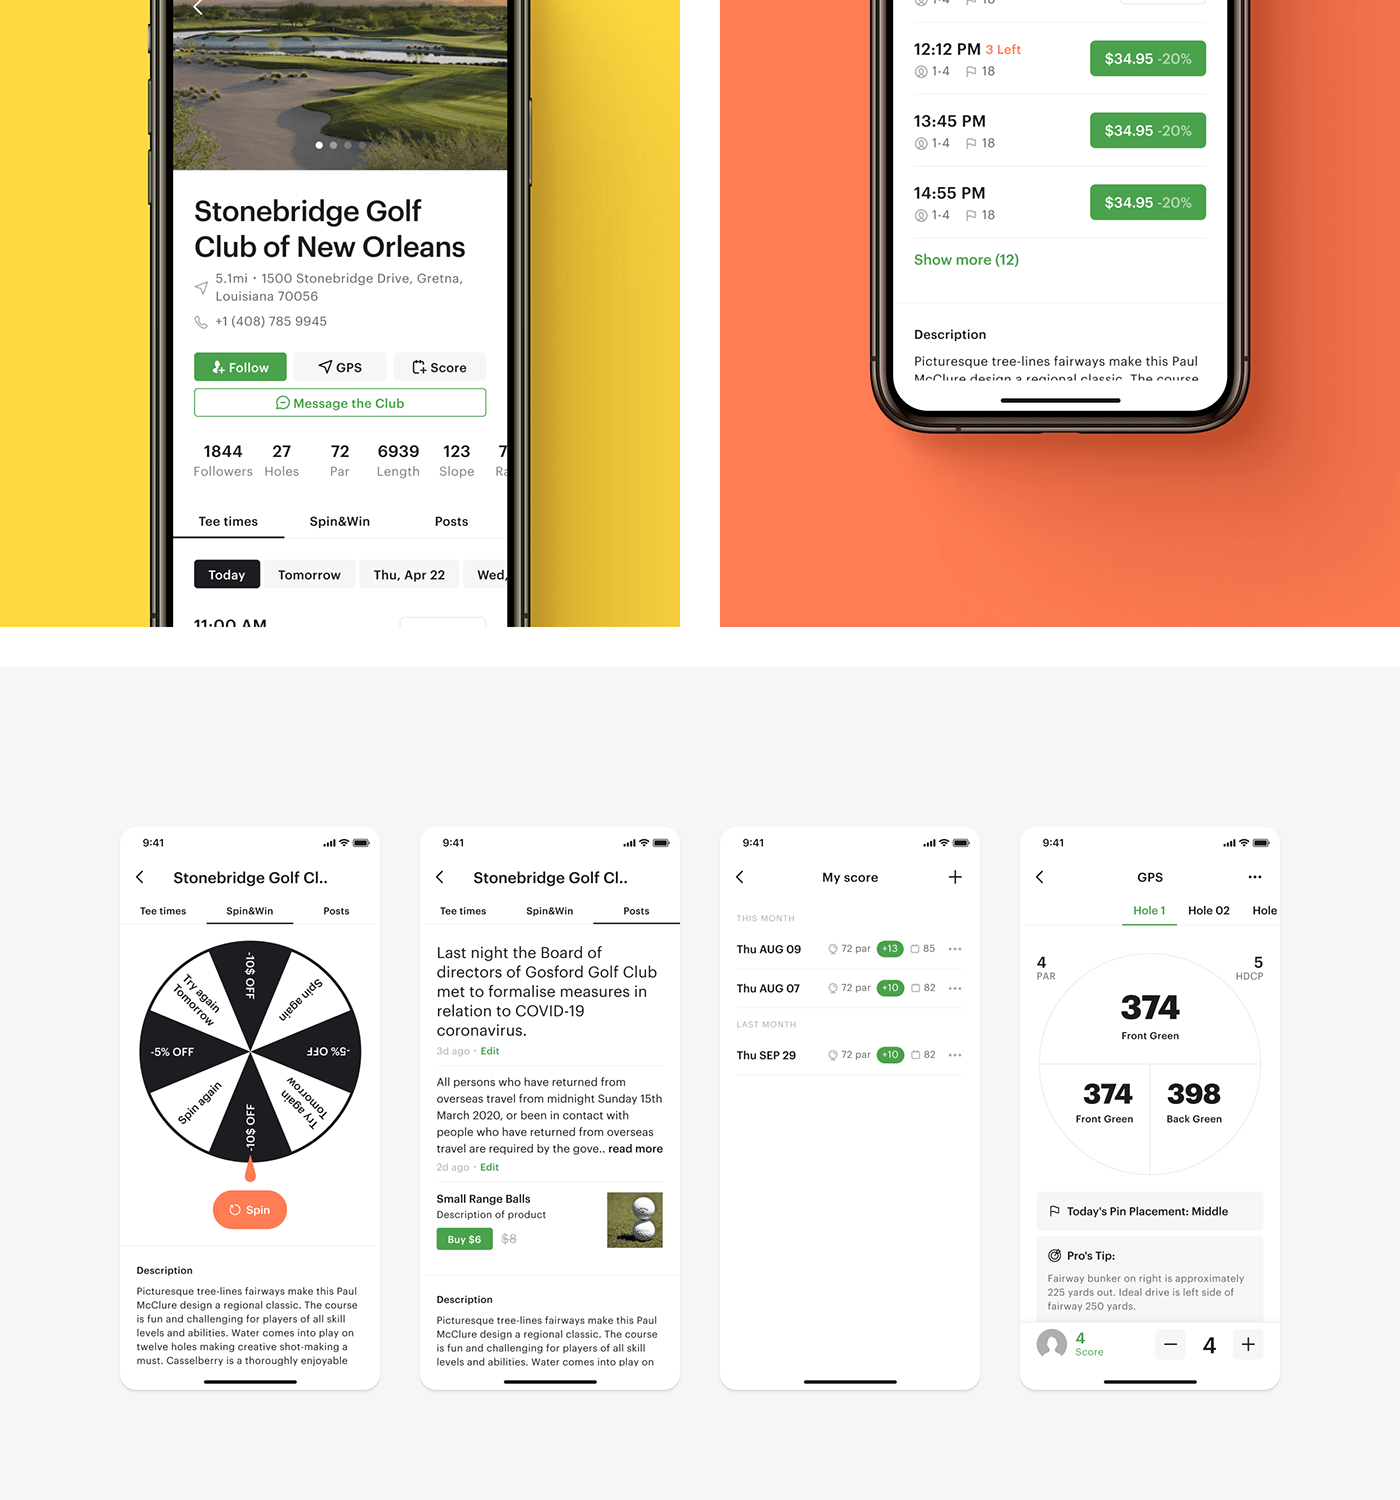 cash golf gps Marketplace spin tee times transfers UI/UX